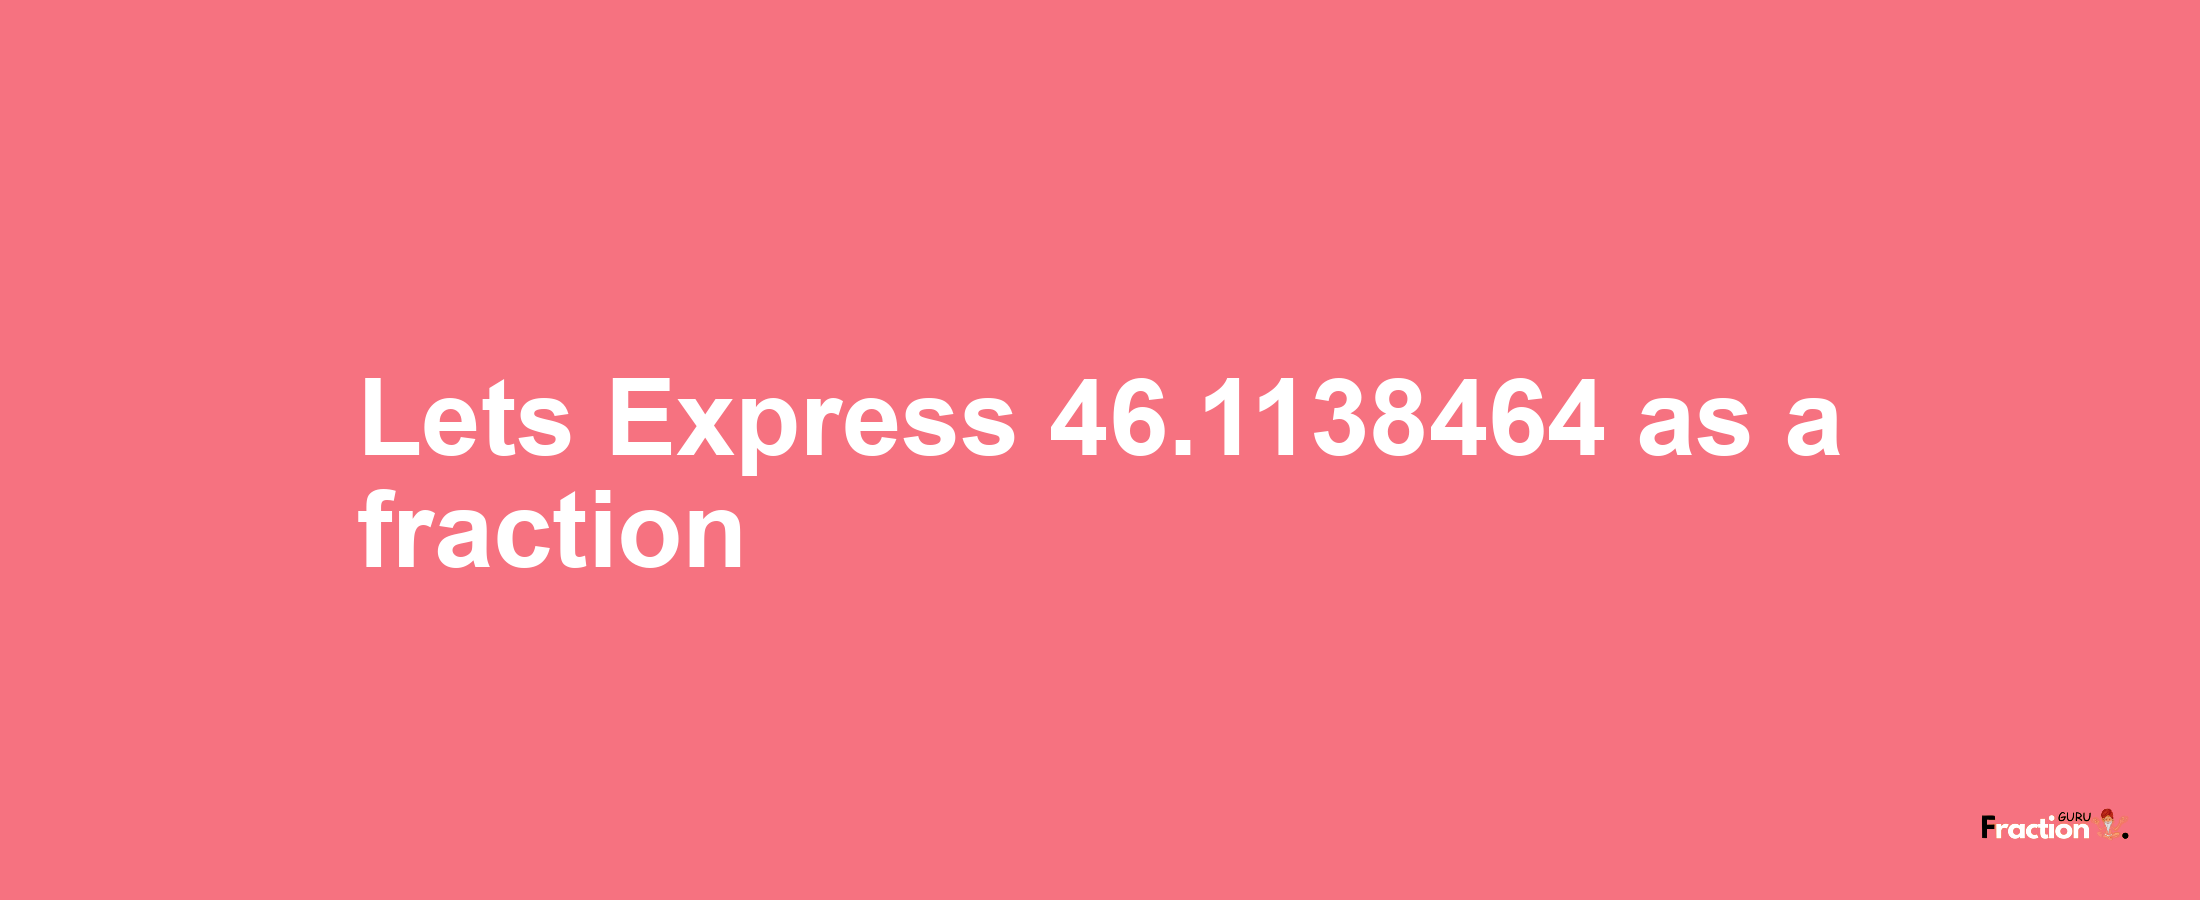 Lets Express 46.1138464 as afraction